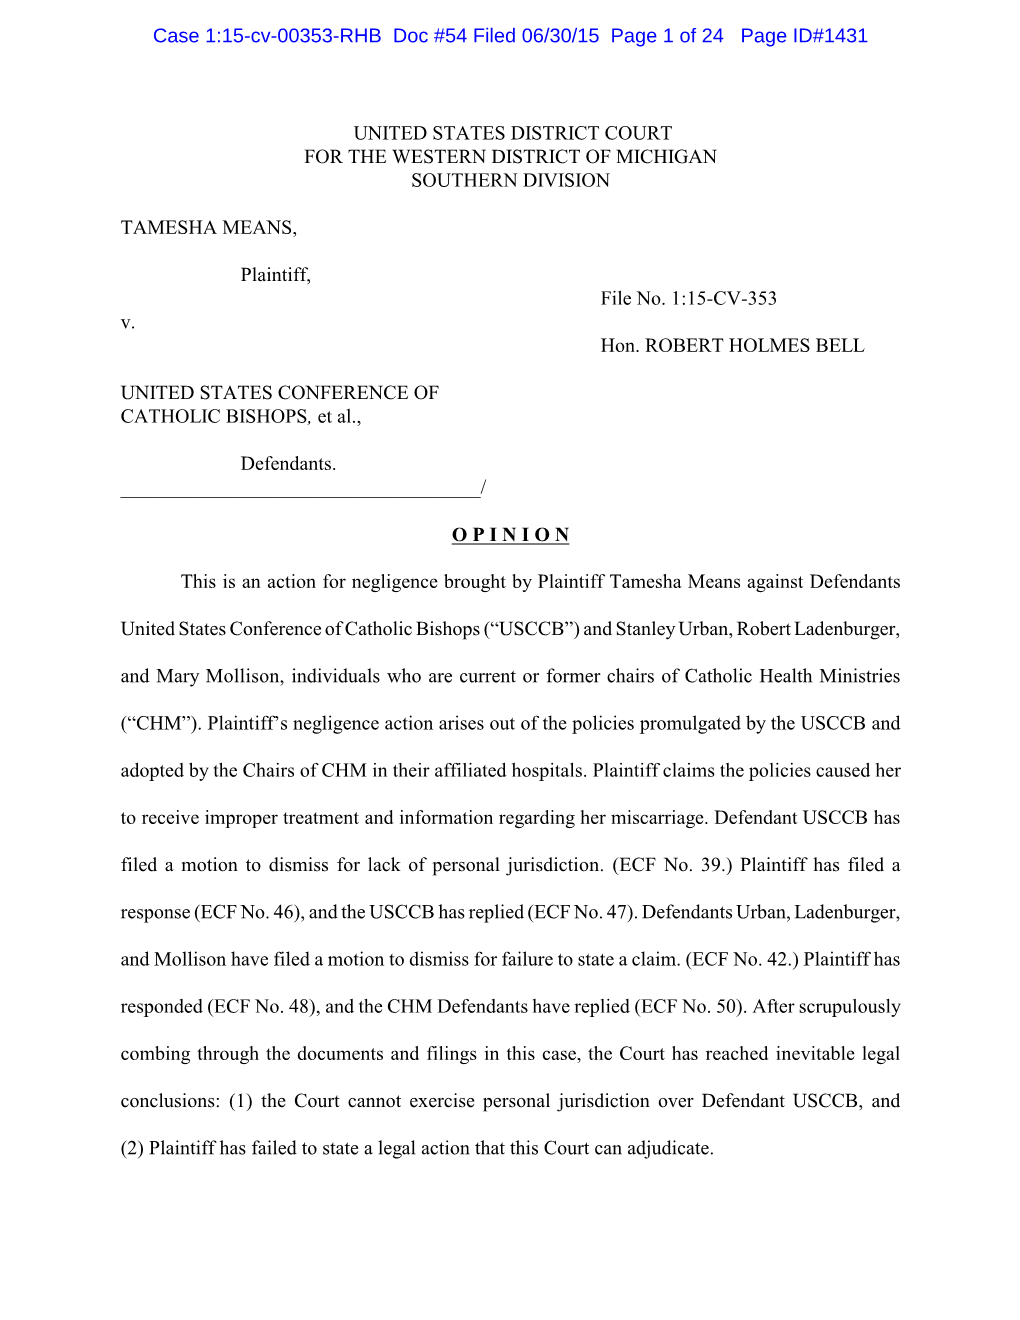 Case 1:15-Cv-00353-RHB Doc #54 Filed 06/30/15 Page 1 of 24 Page ID#1431